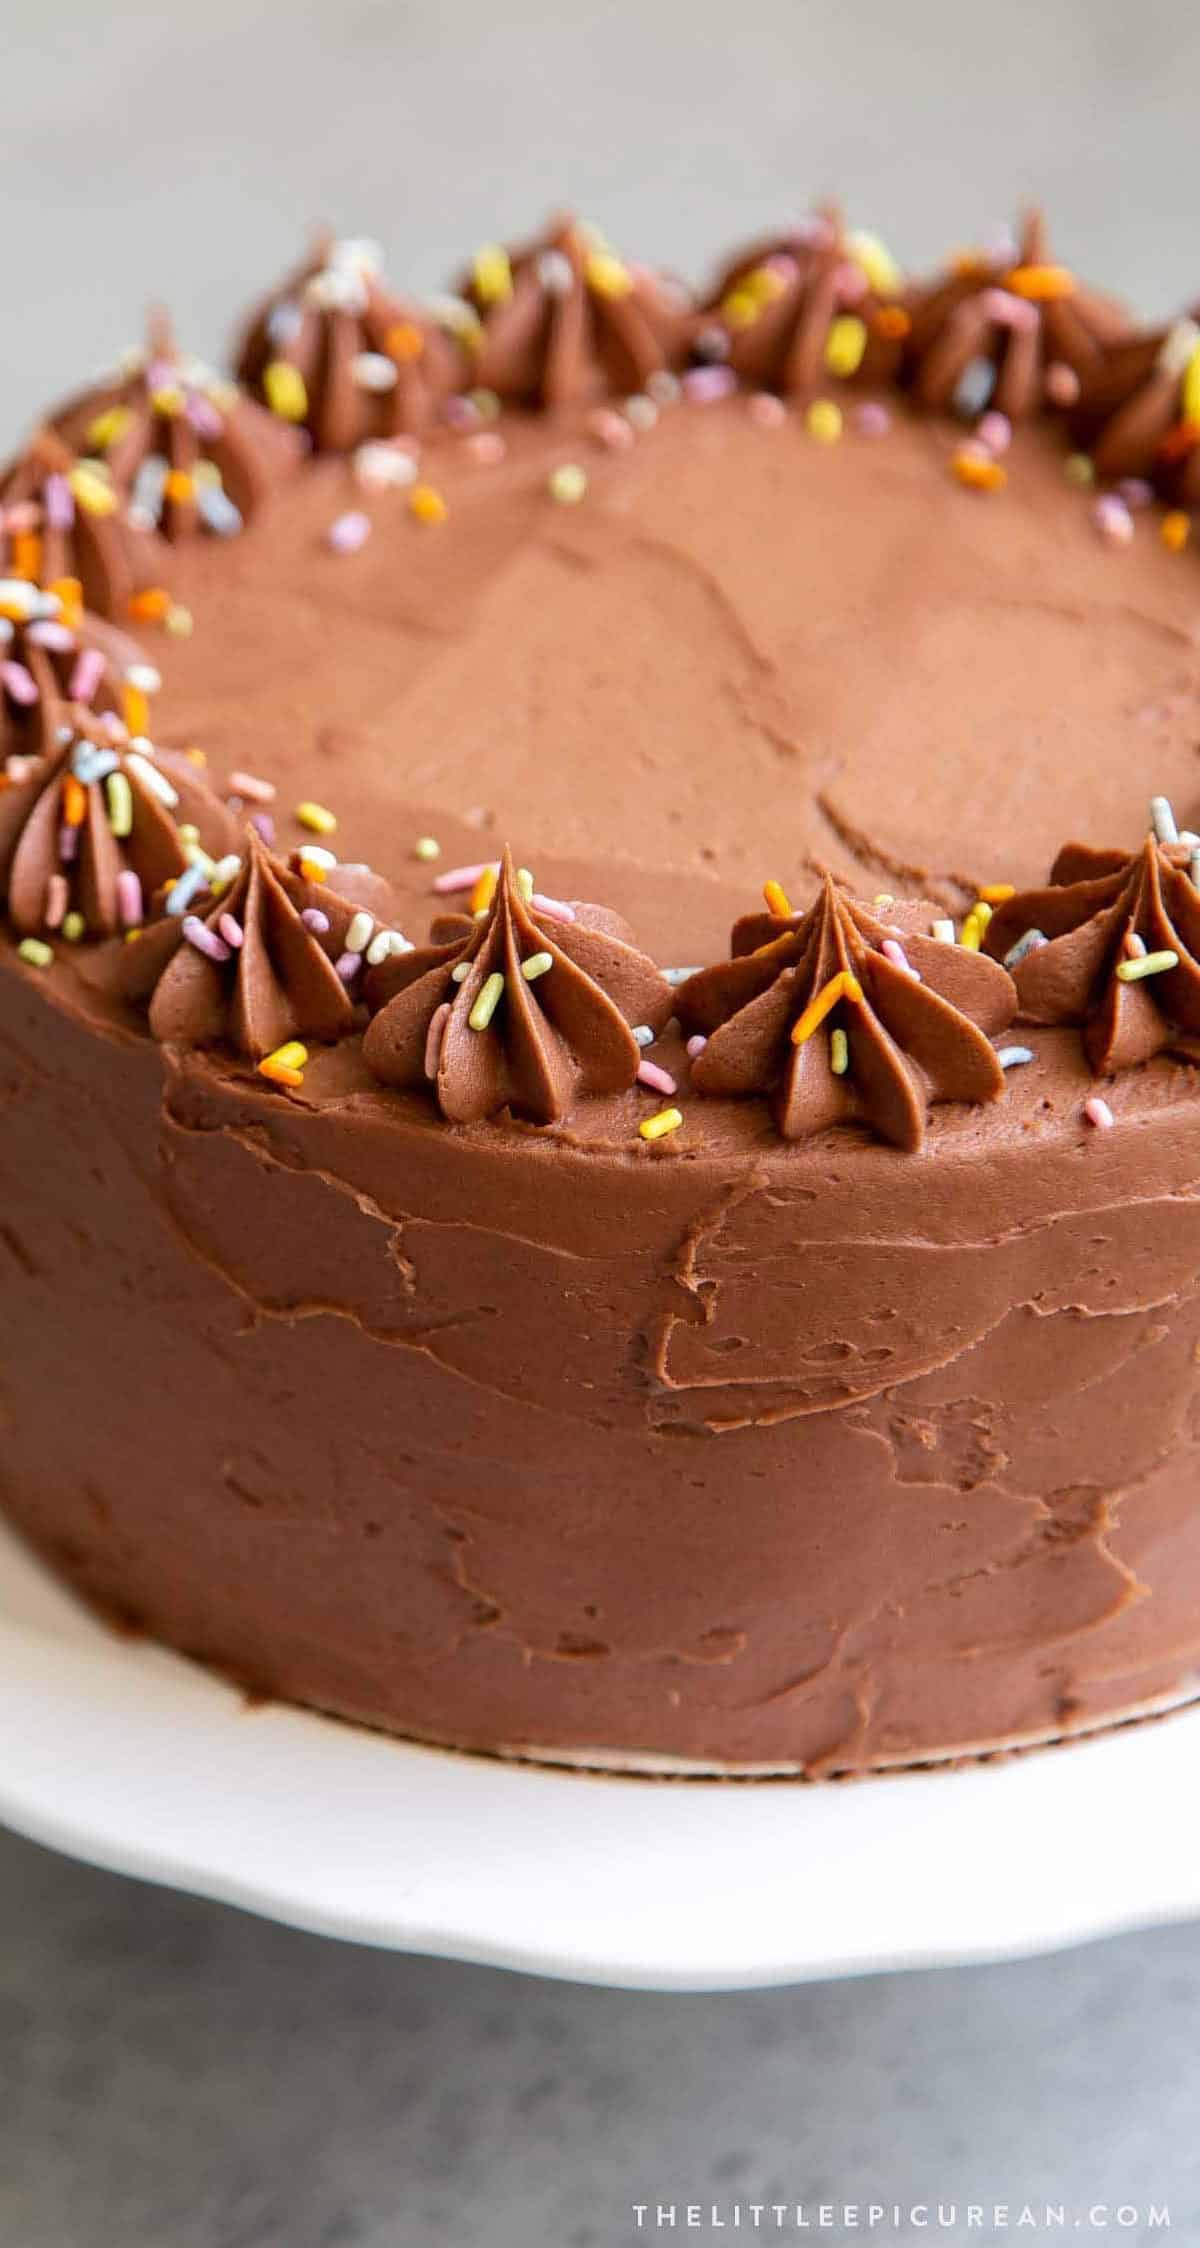  Step up your cake decoration game with this delectable chocolate paste.